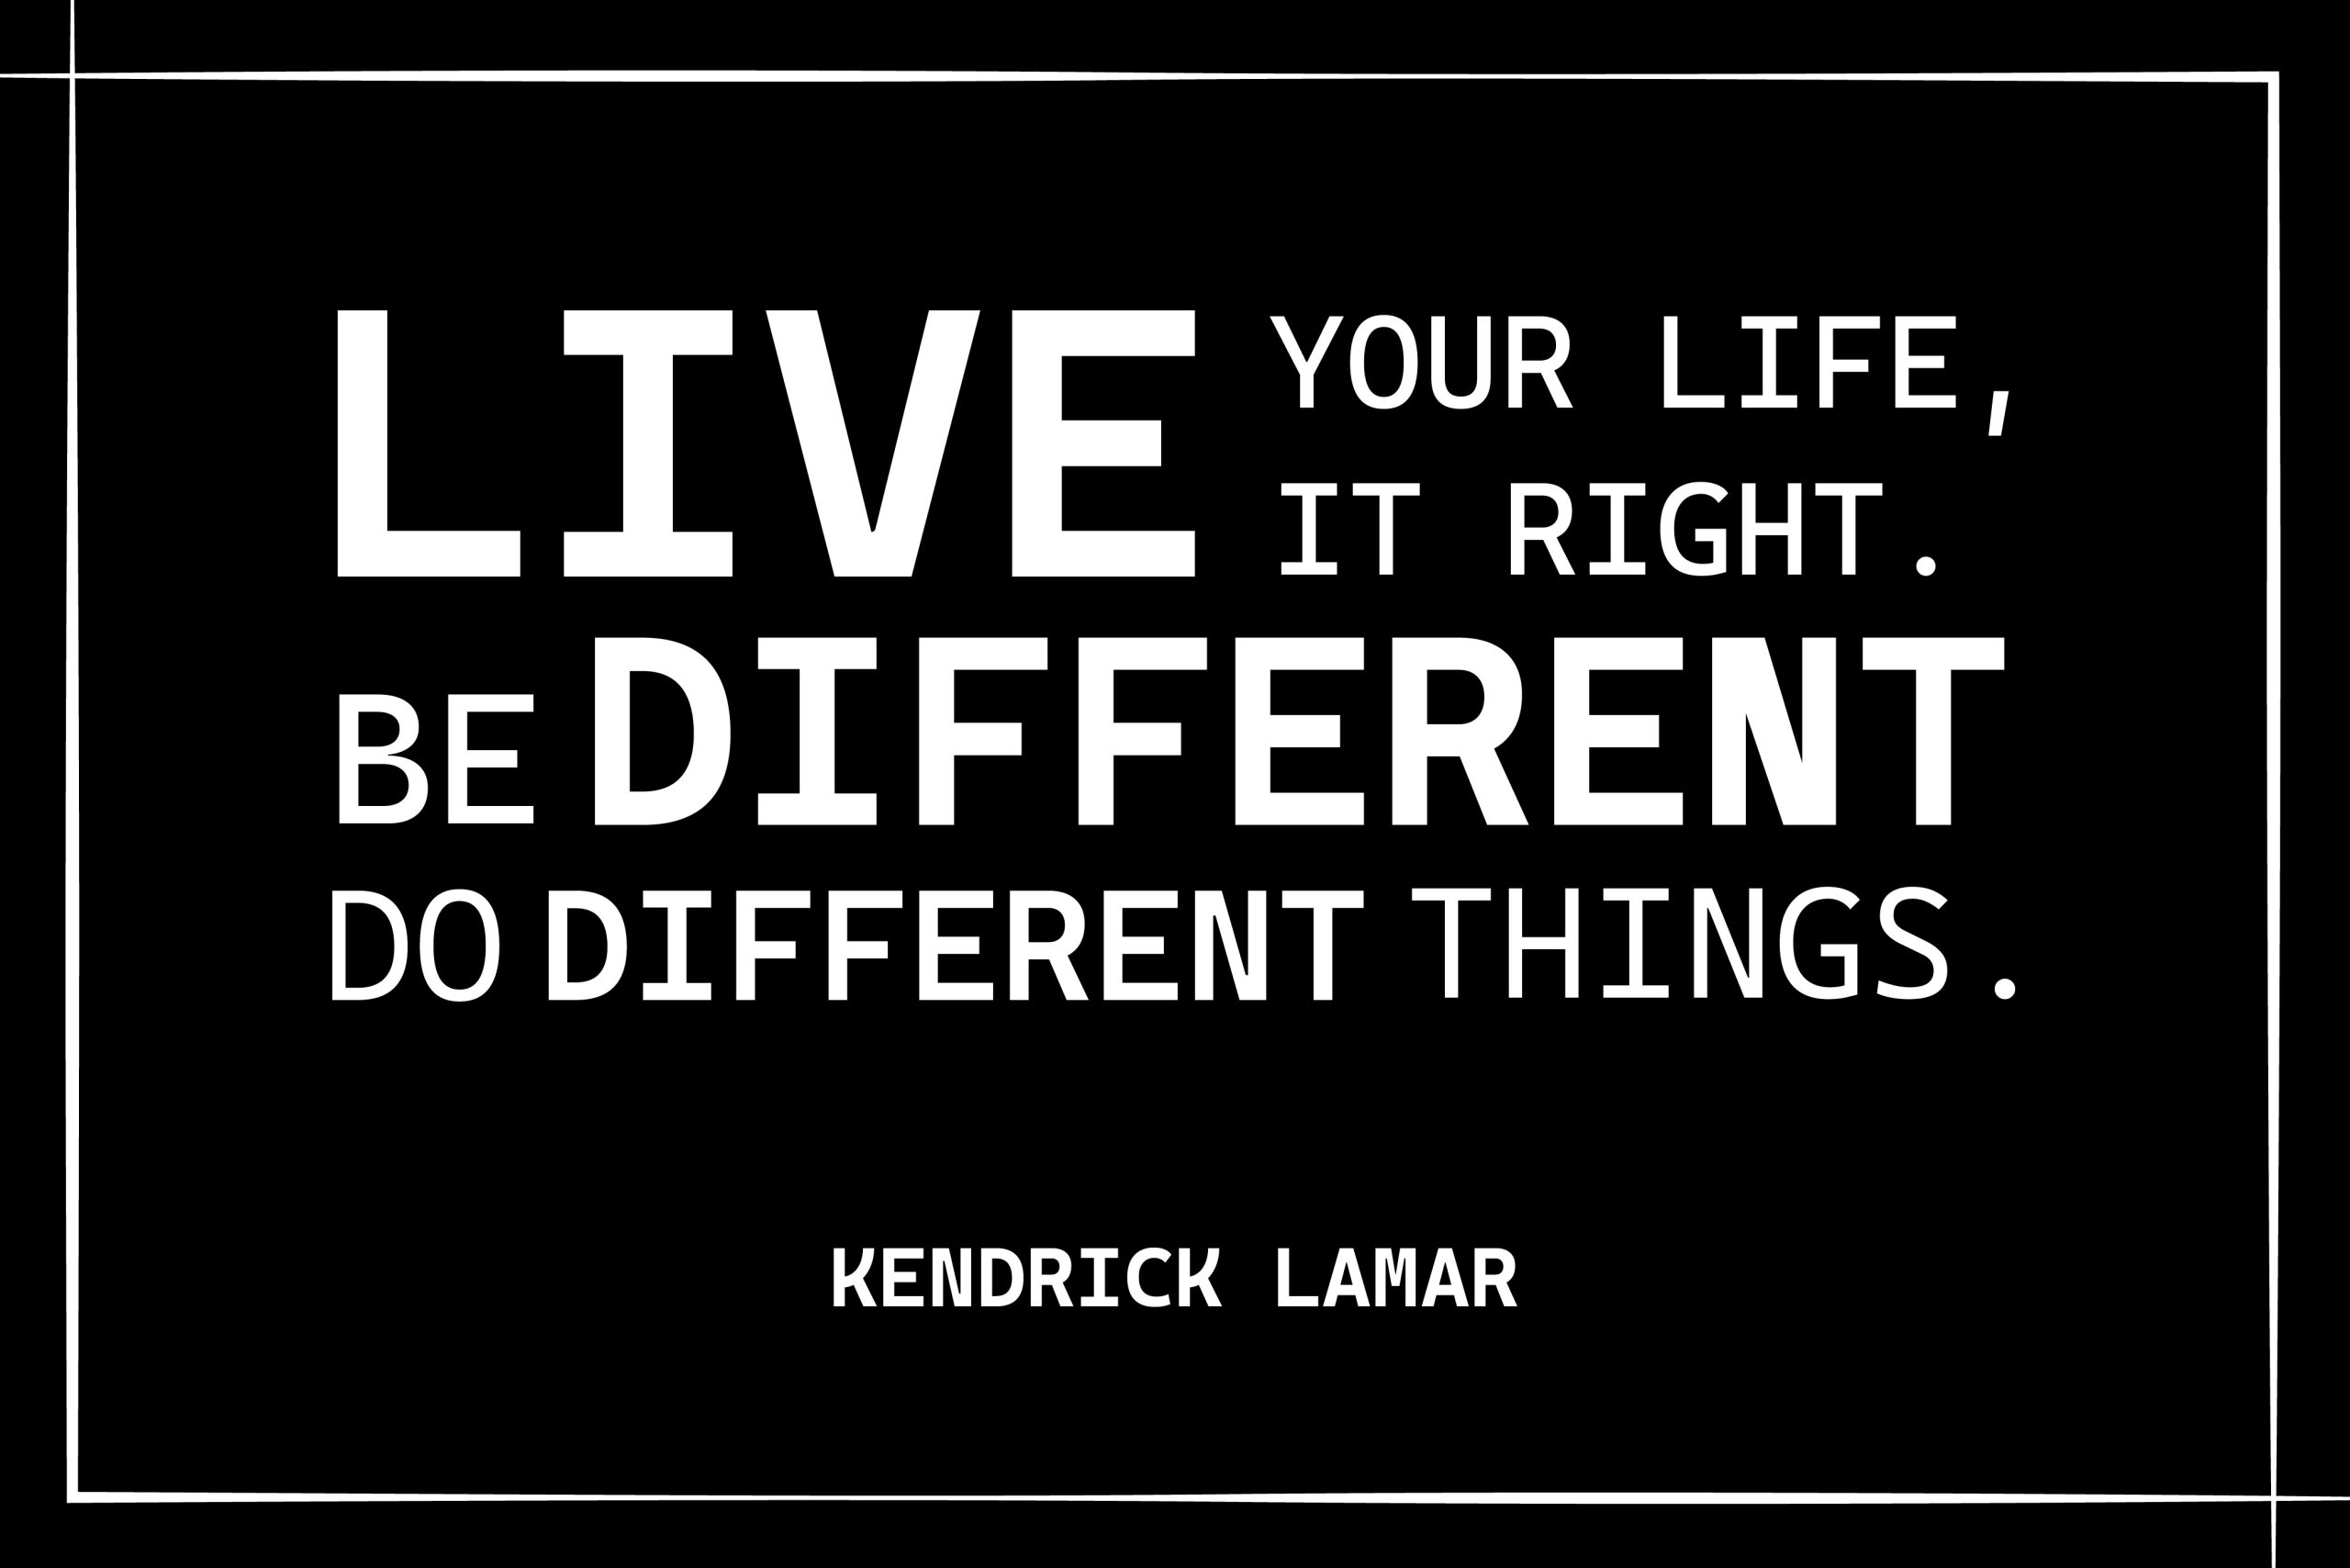  “Live your life, live it right. Be different, do different things.” Kendrick Lamar